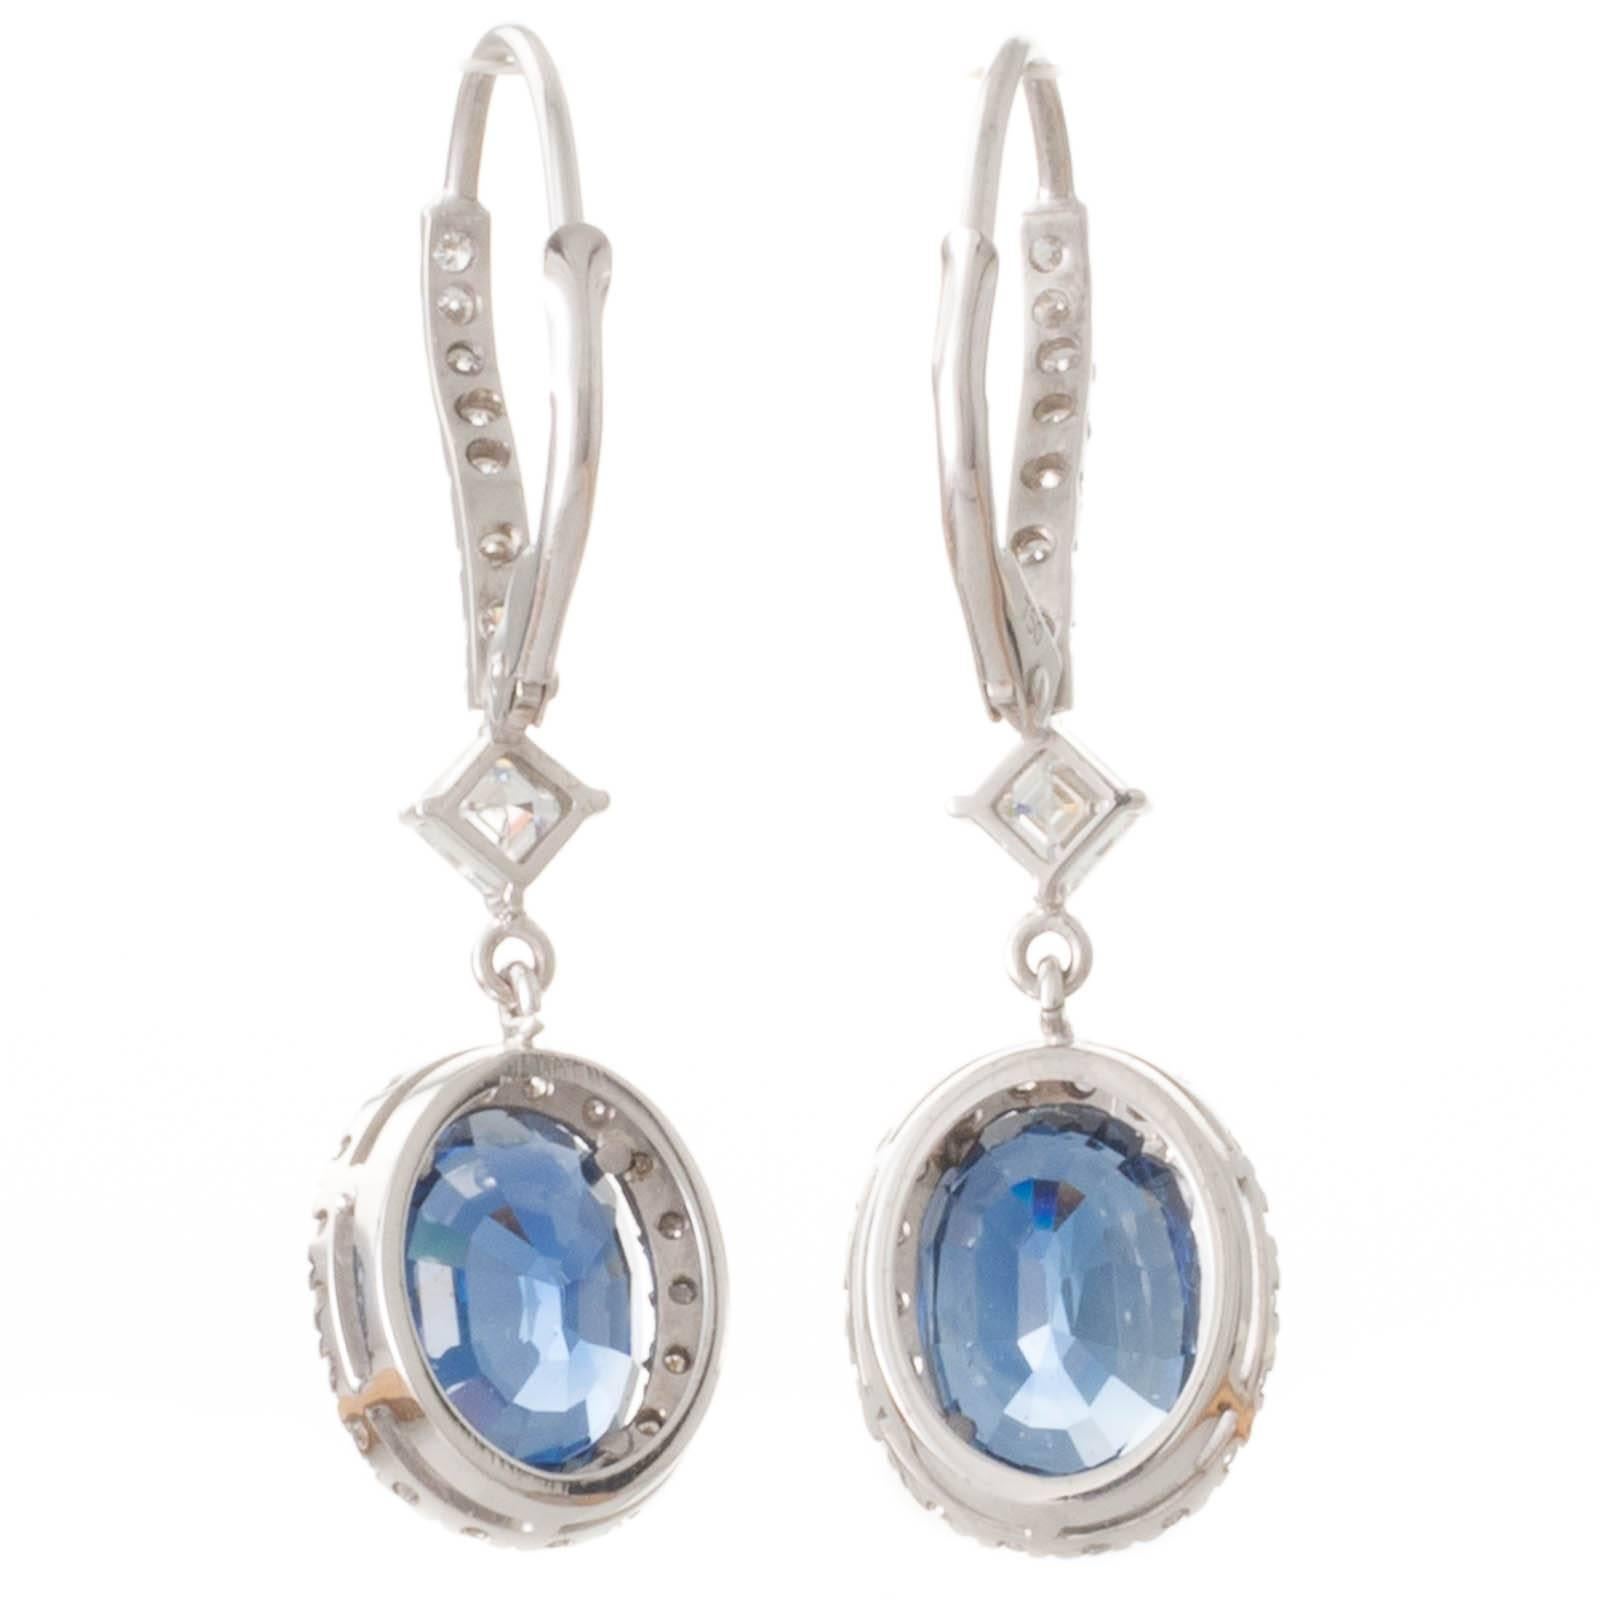 A pair of 18ct white gold hand made earrings featuring oval cut sapphires of 2.77ct and 3.03ct both accompanied by GIA certificates stating they are unheated each set in four claws with a border of 18 (36 in total) round brilliant cut diamonds of